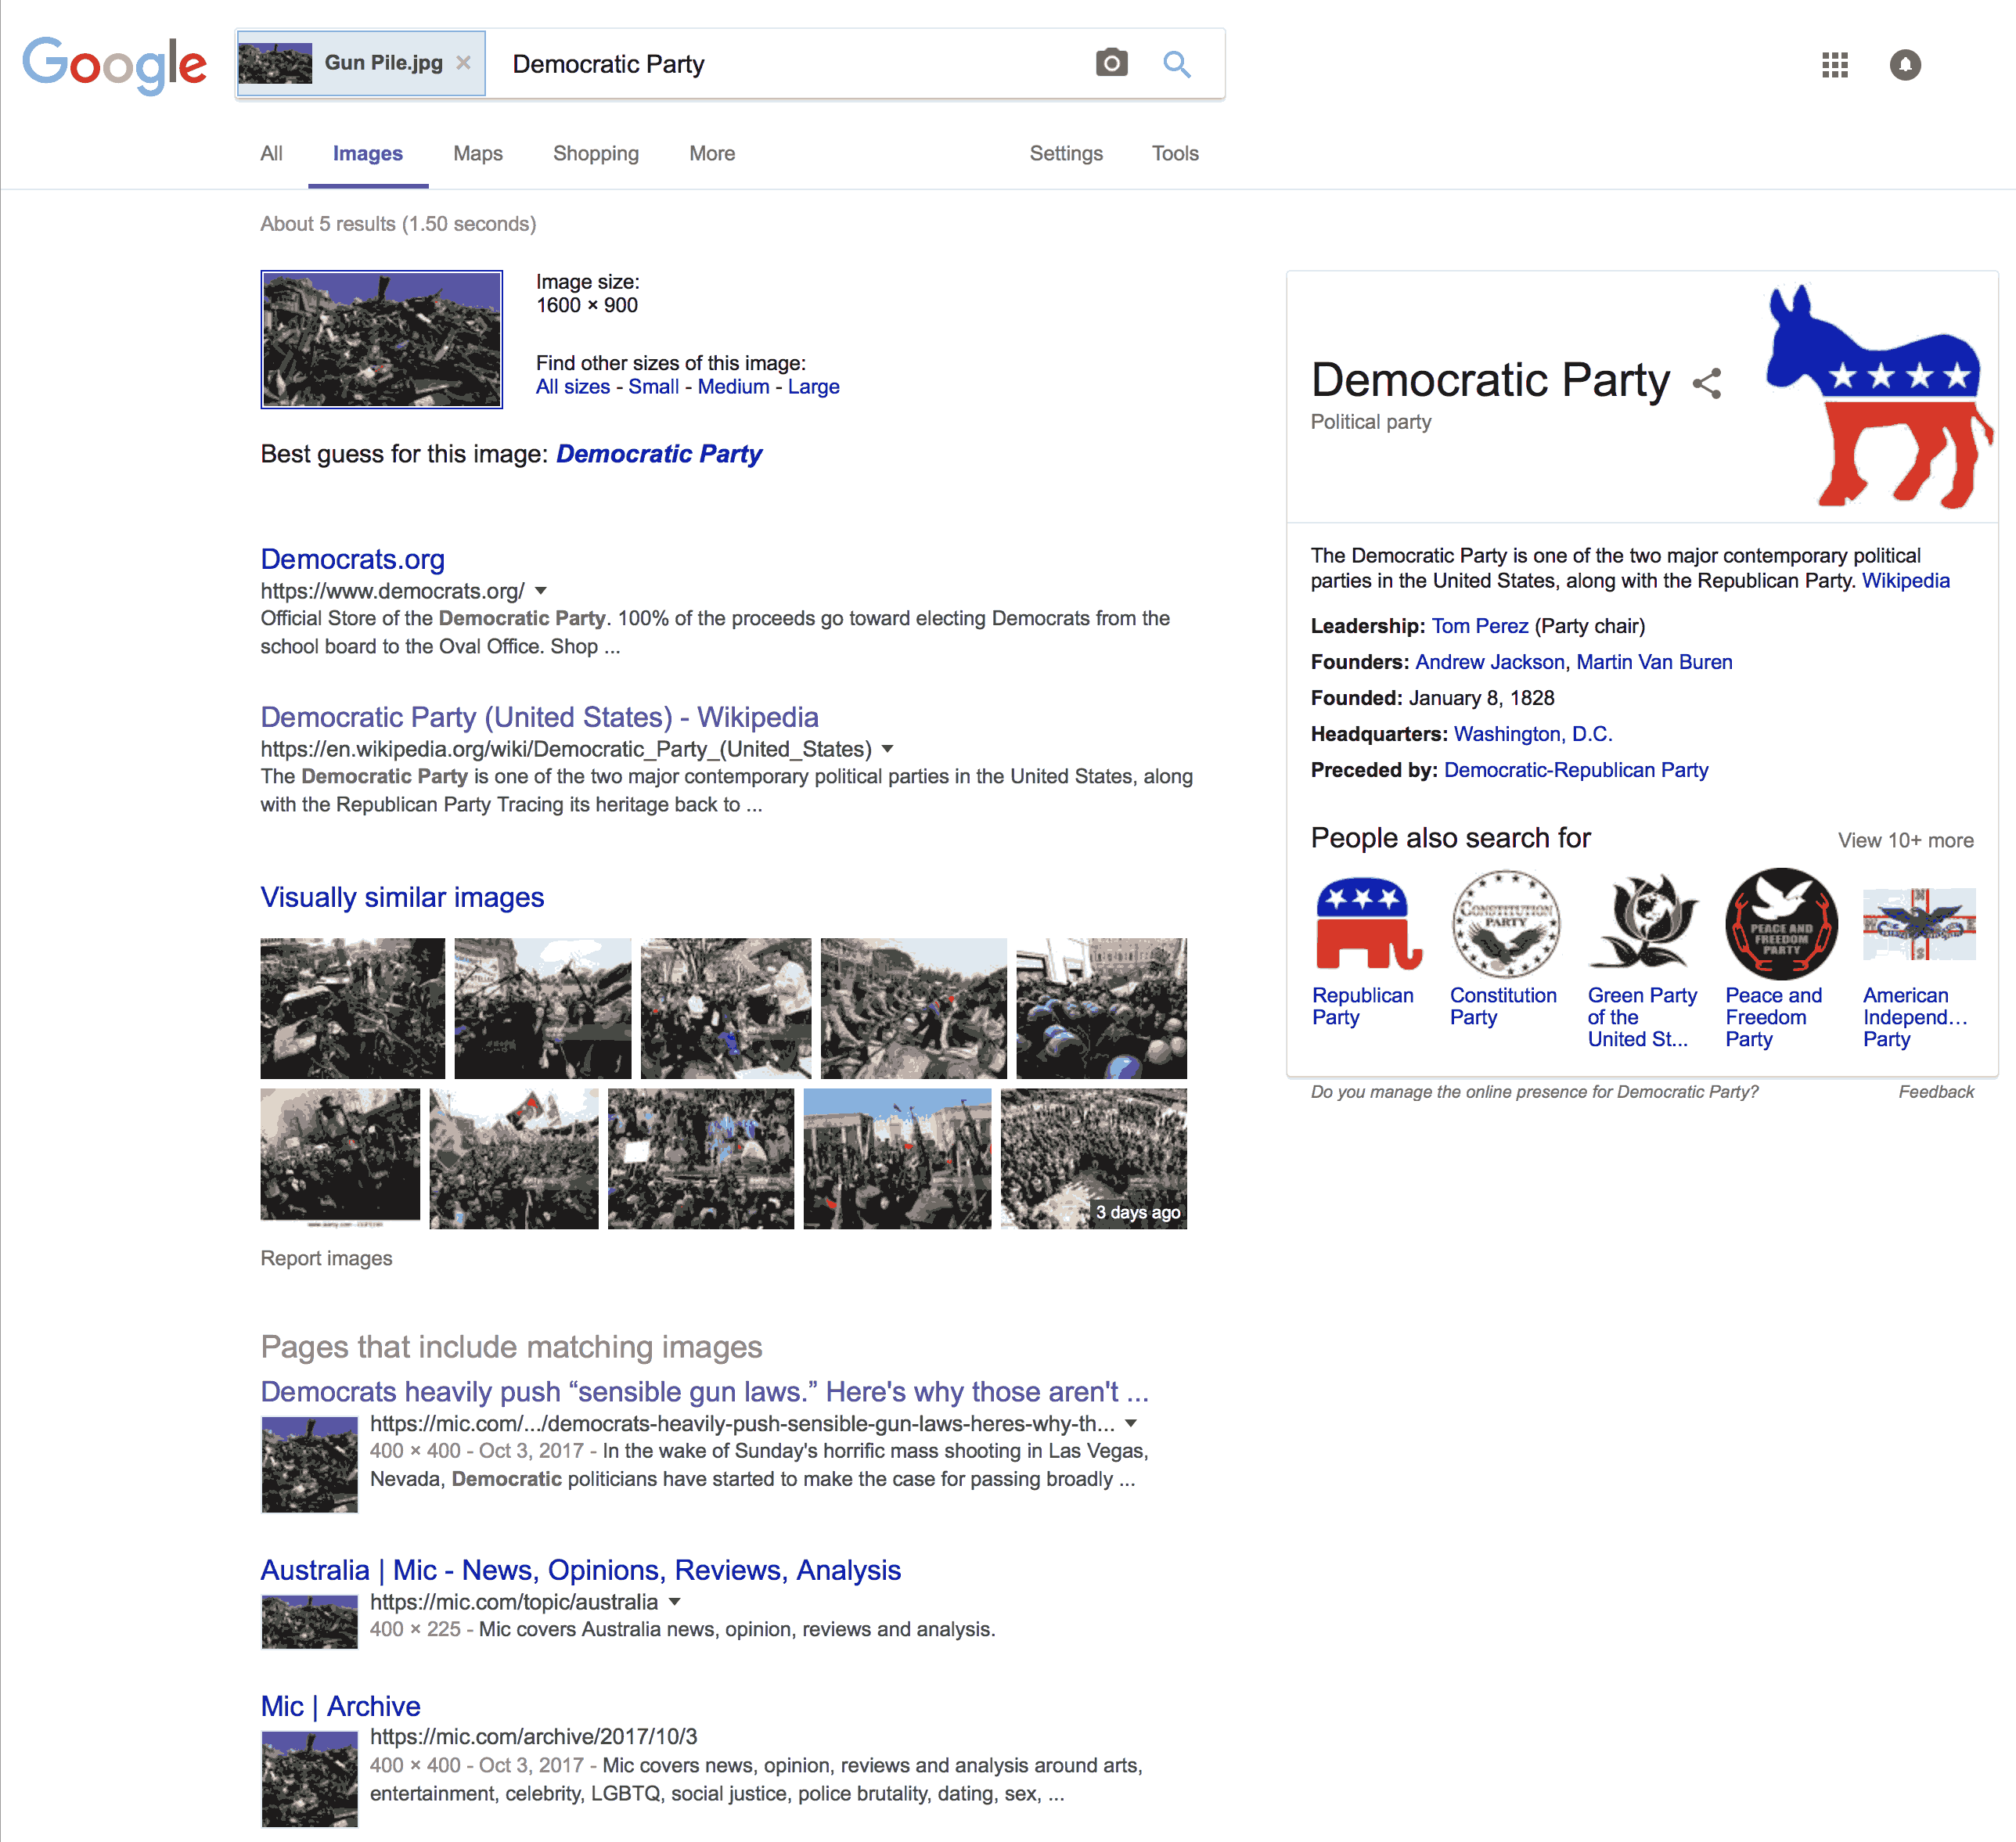 Best guess is Democrats: Looking for the source of a pile of firearms about to be destroyed, Google returned “Best guess for this image is Democratic Party.”; gun control; Google; Democrats